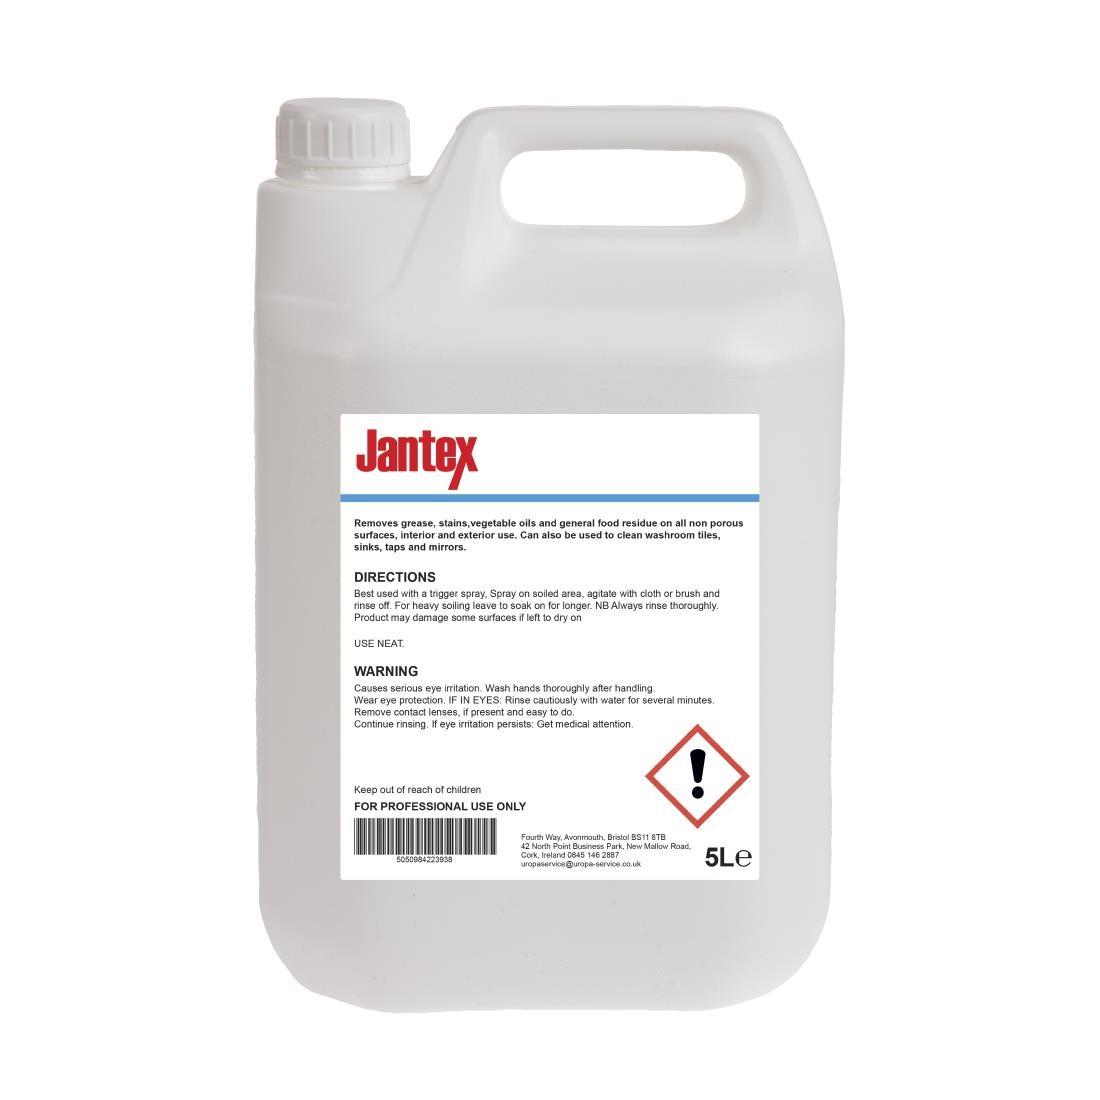 Jantex Grill and Oven Cleaner Ready To Use 5Ltr (Single Pack) - CF972  - 2